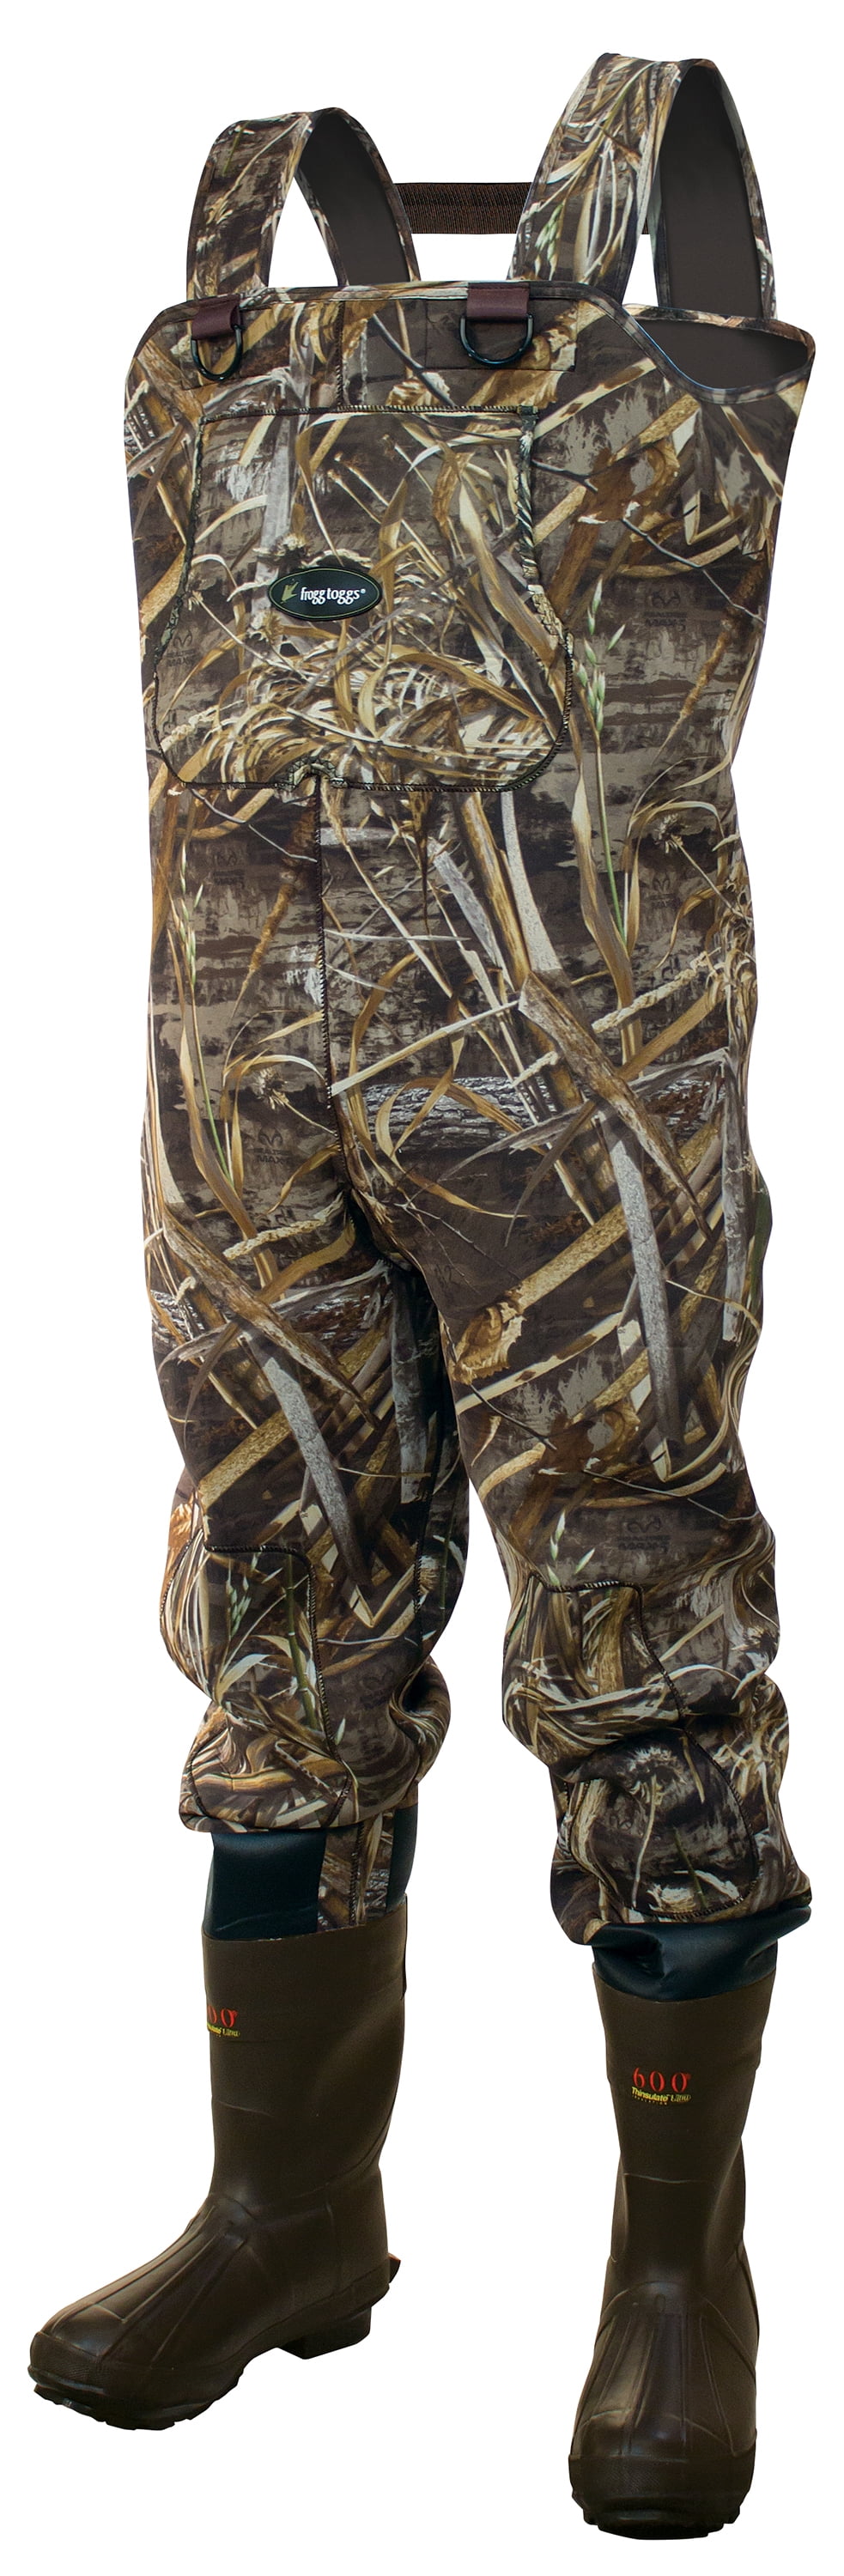 FROGG TOGGS BULLTOGG REAL TREE MAX-5 GD MEN'S WADERS ASSORTED SIZES NEW IN BOX 